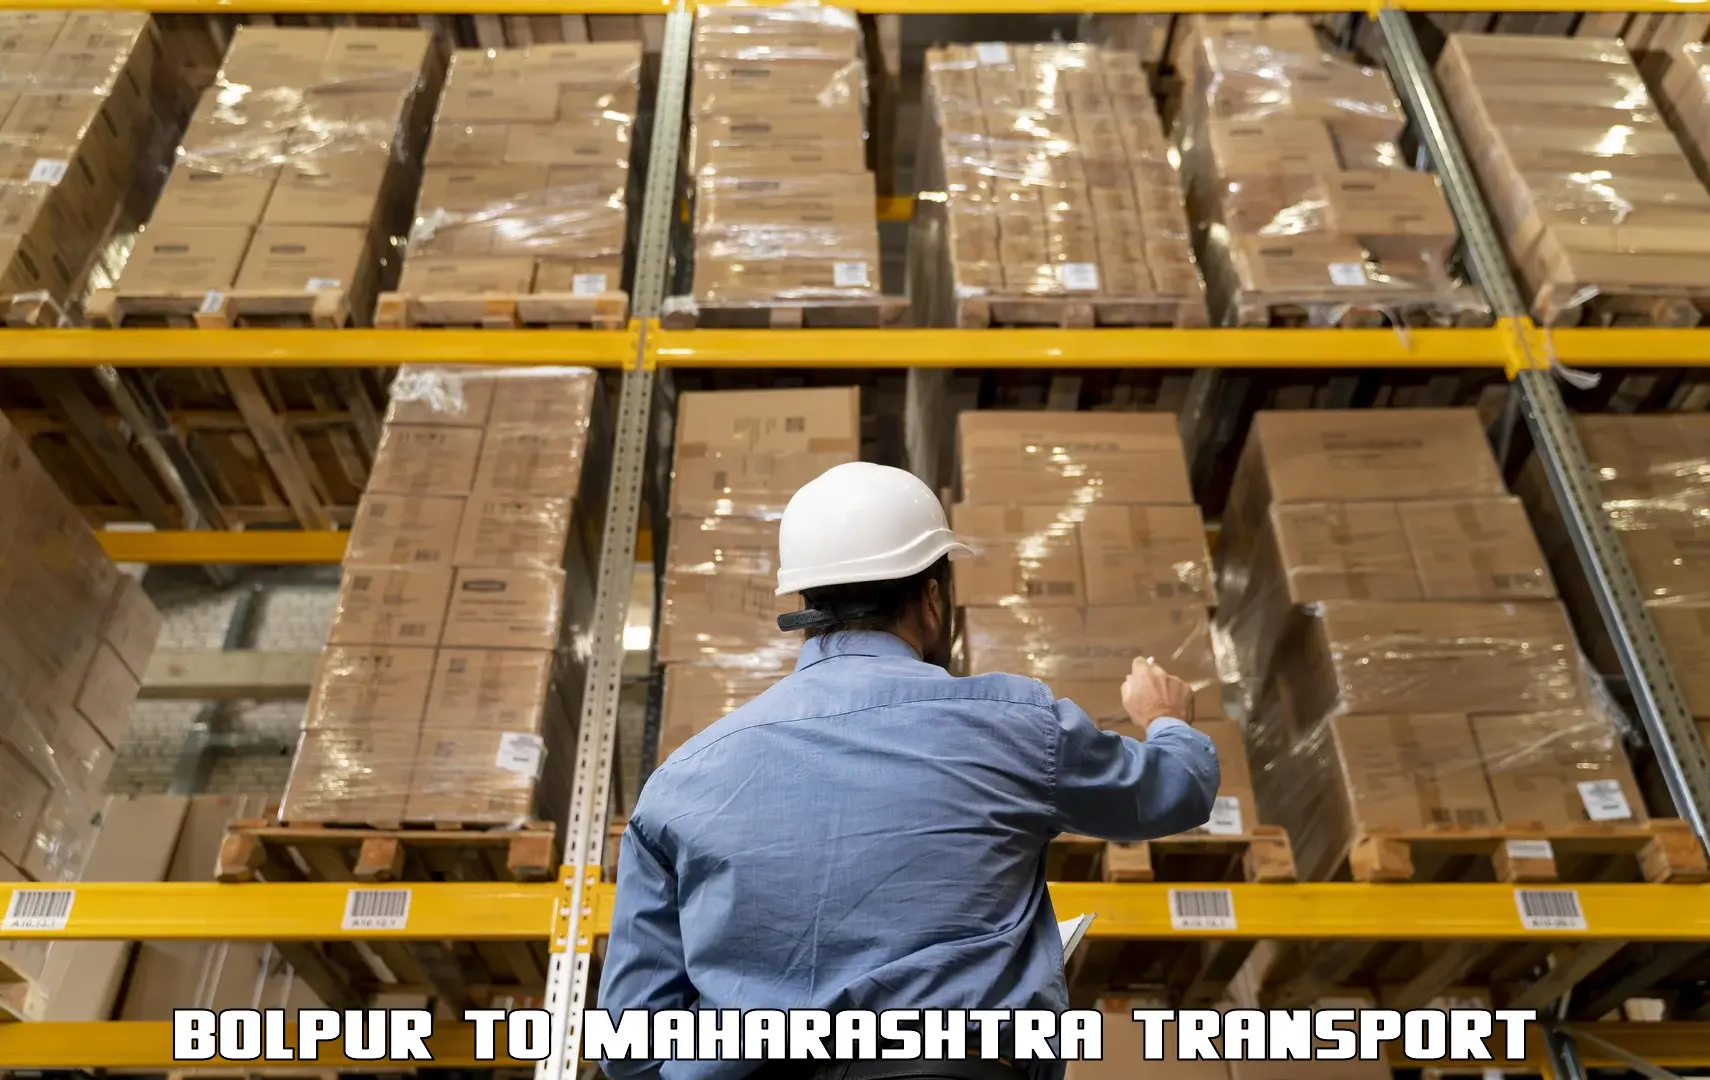 Truck transport companies in India Bolpur to Aheri